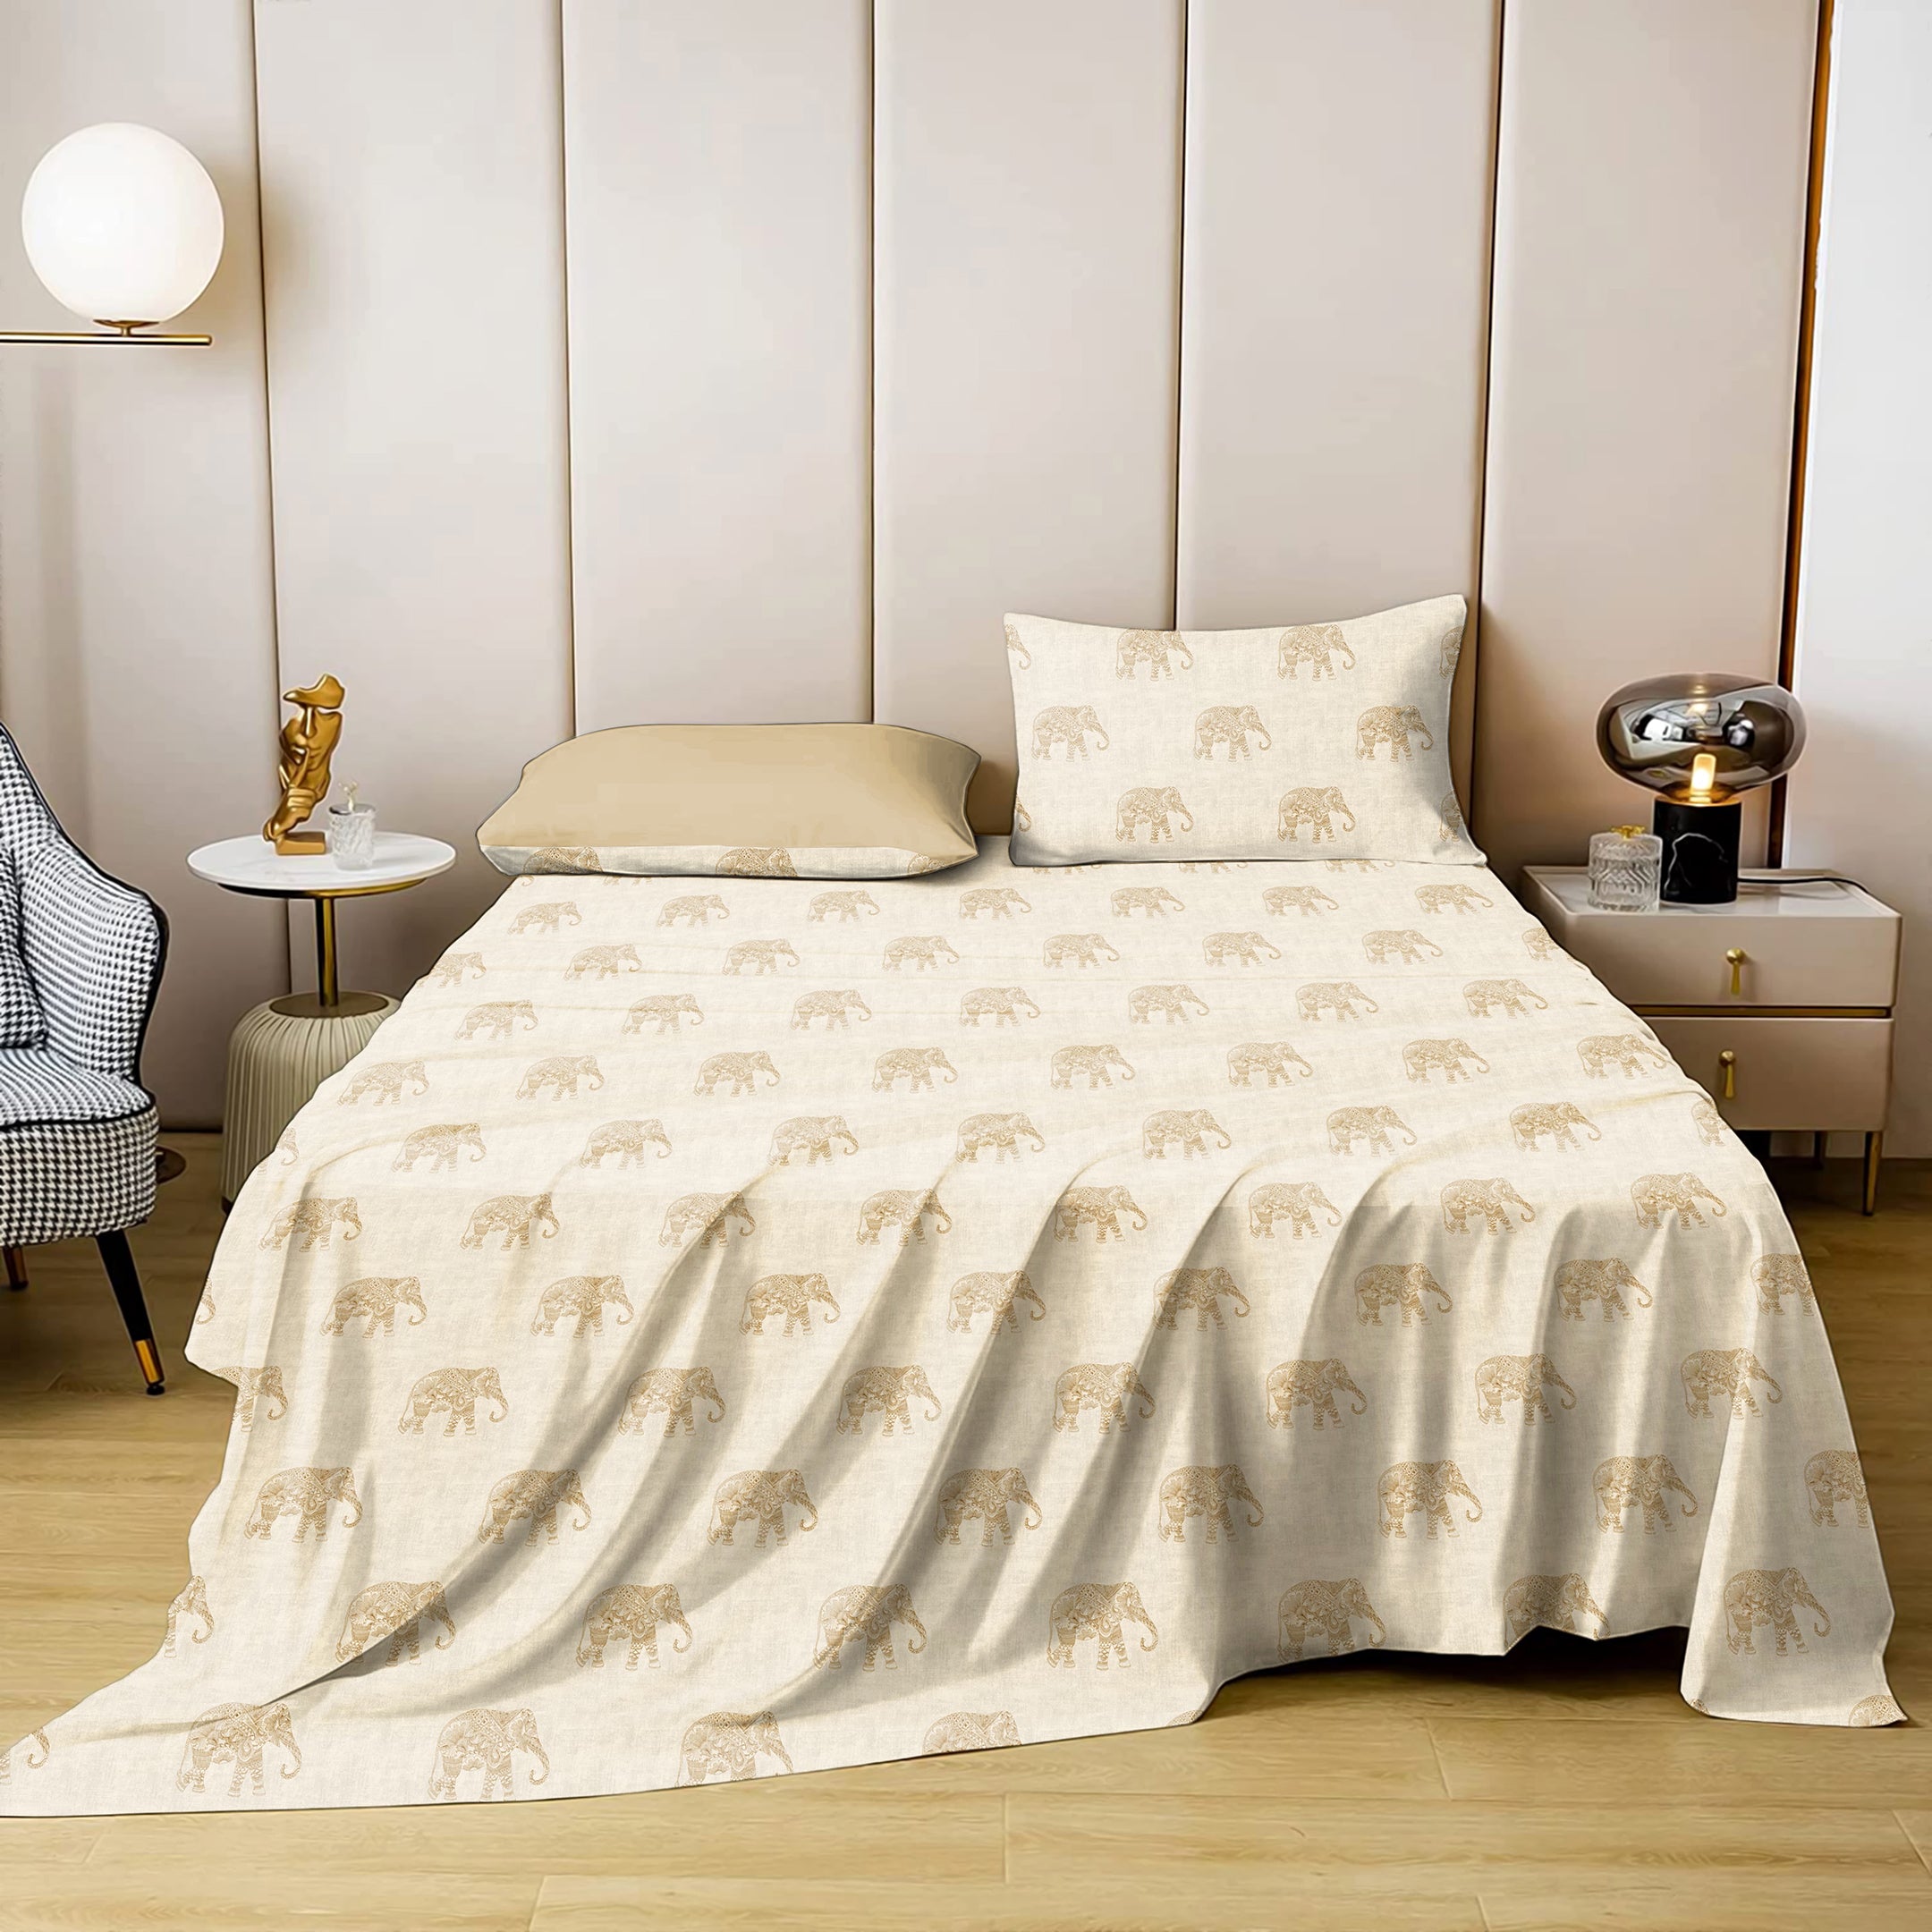 Jodhpur Elephant Bedsheet for Double Bed with 2 PillowCovers King Size (104" X 90") Biscuit